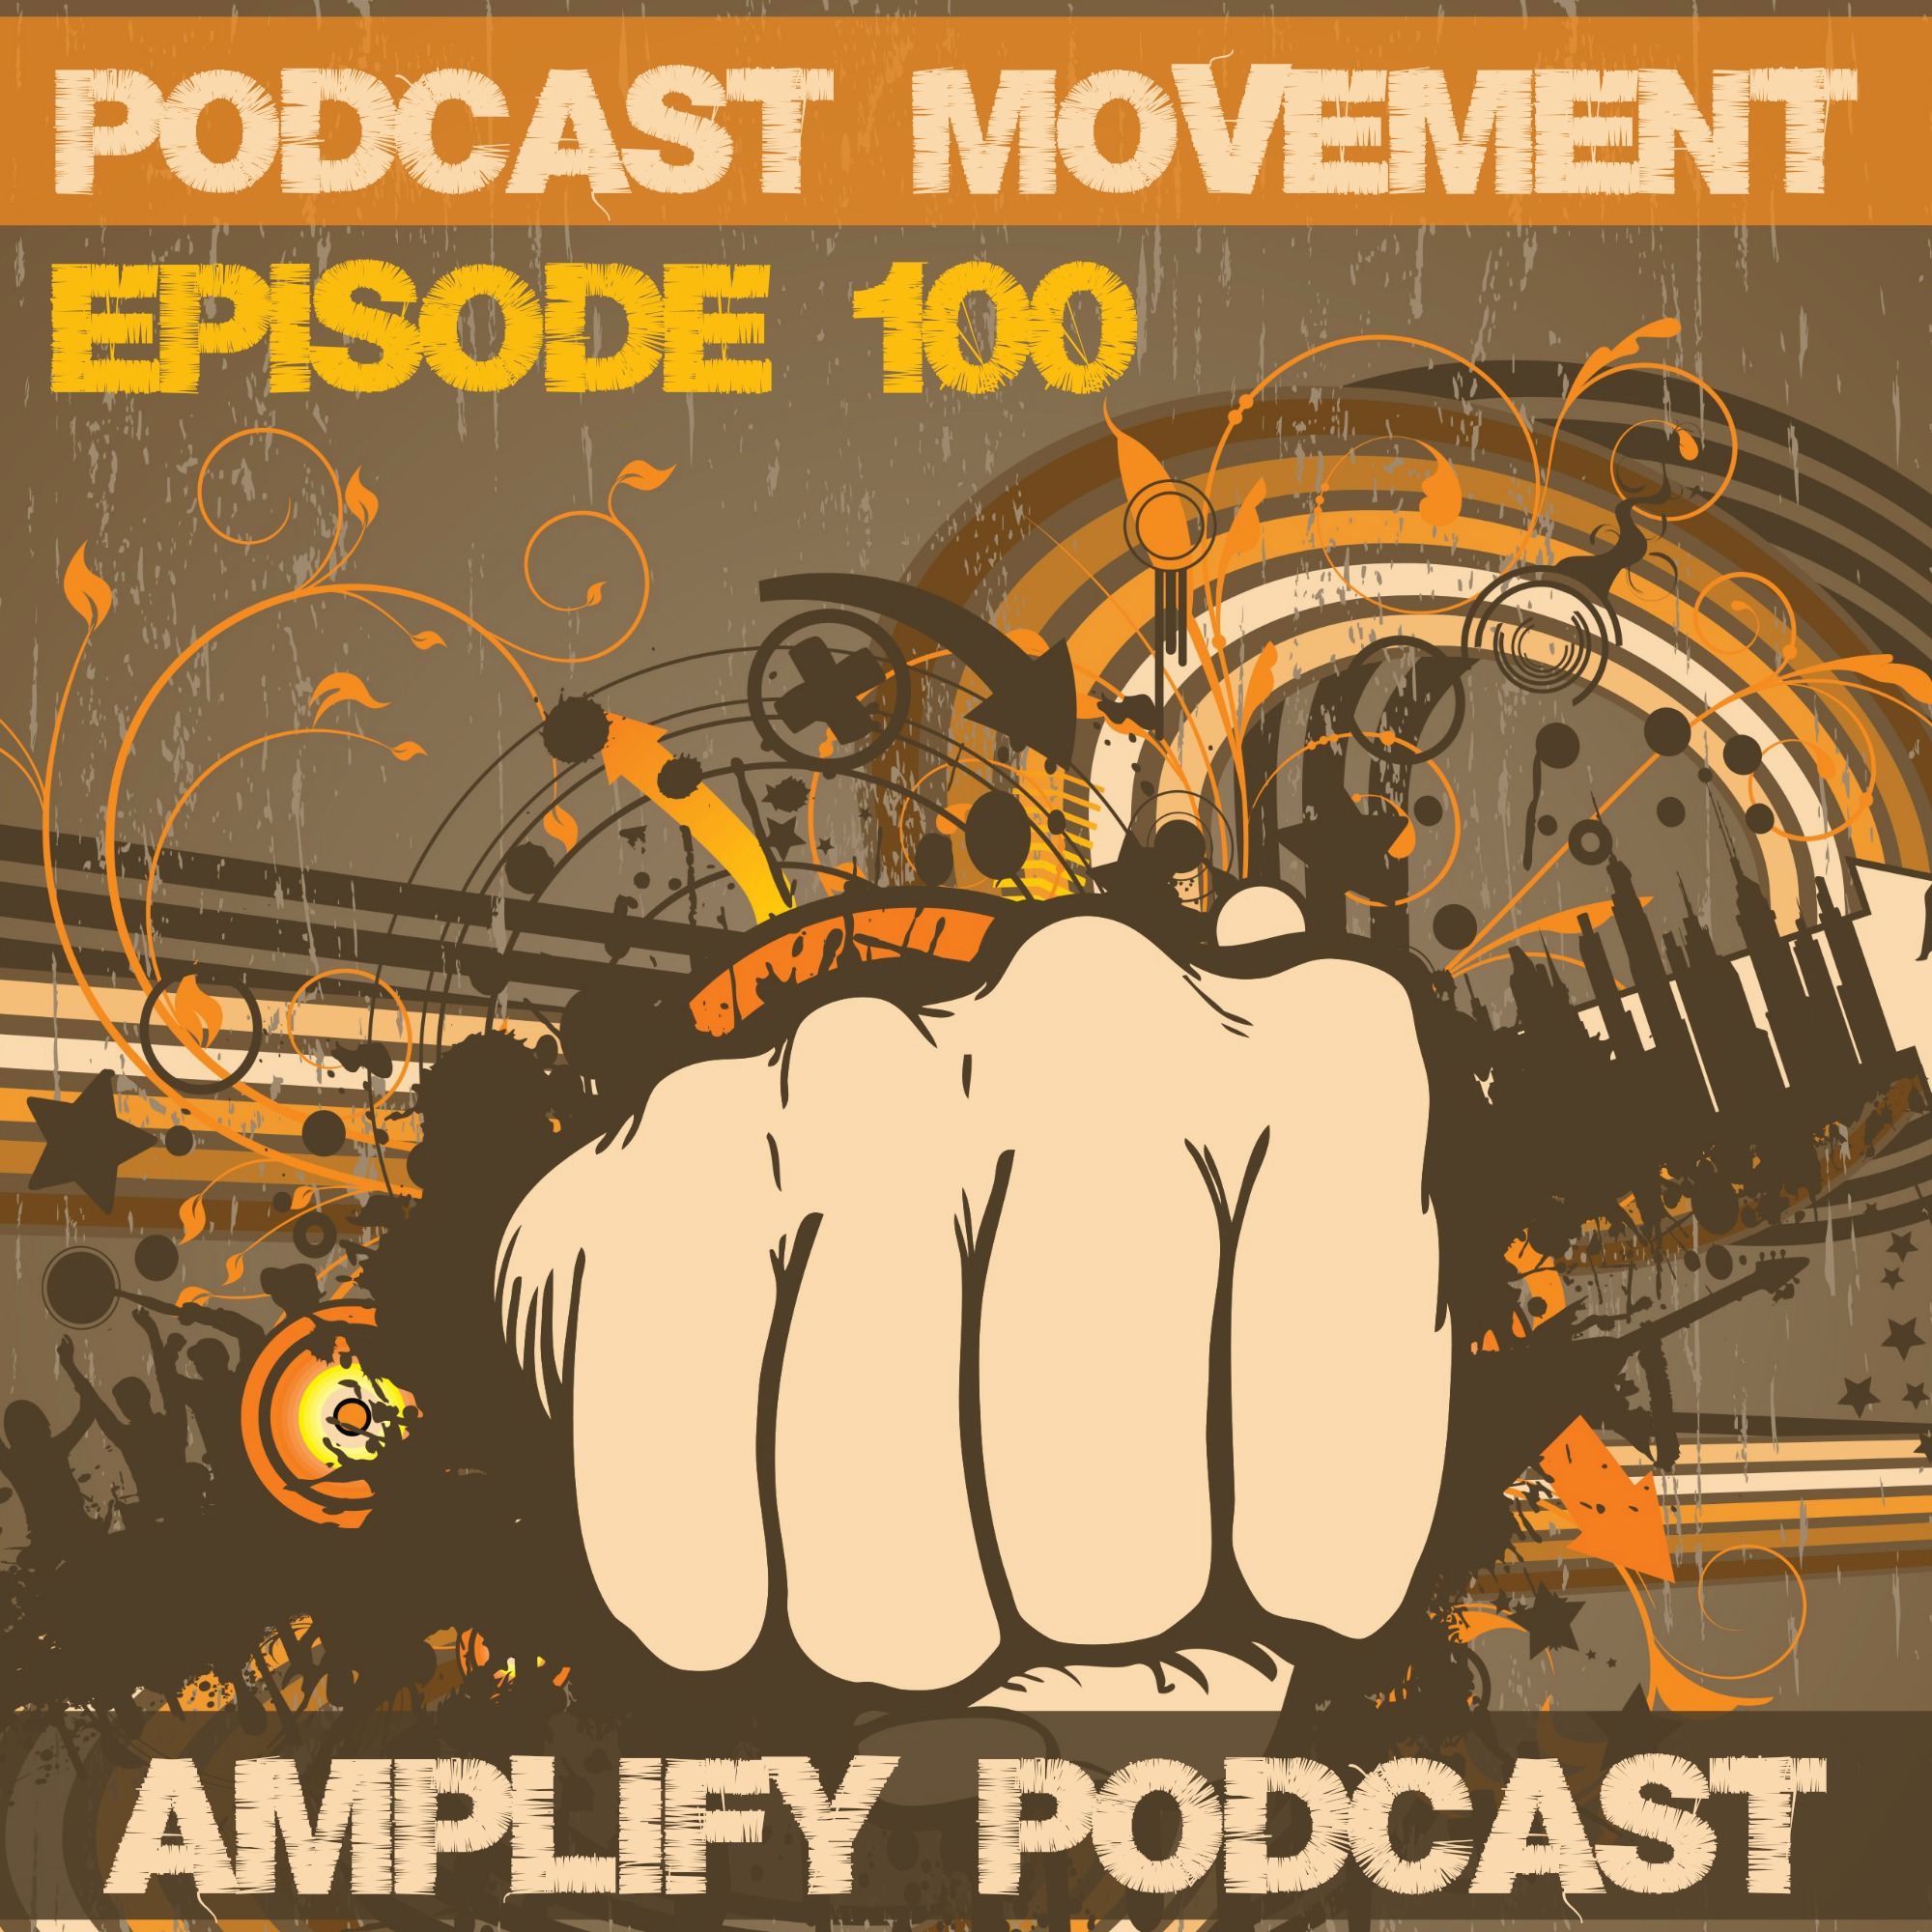 The Special Podcast Movement Edition of Amplify